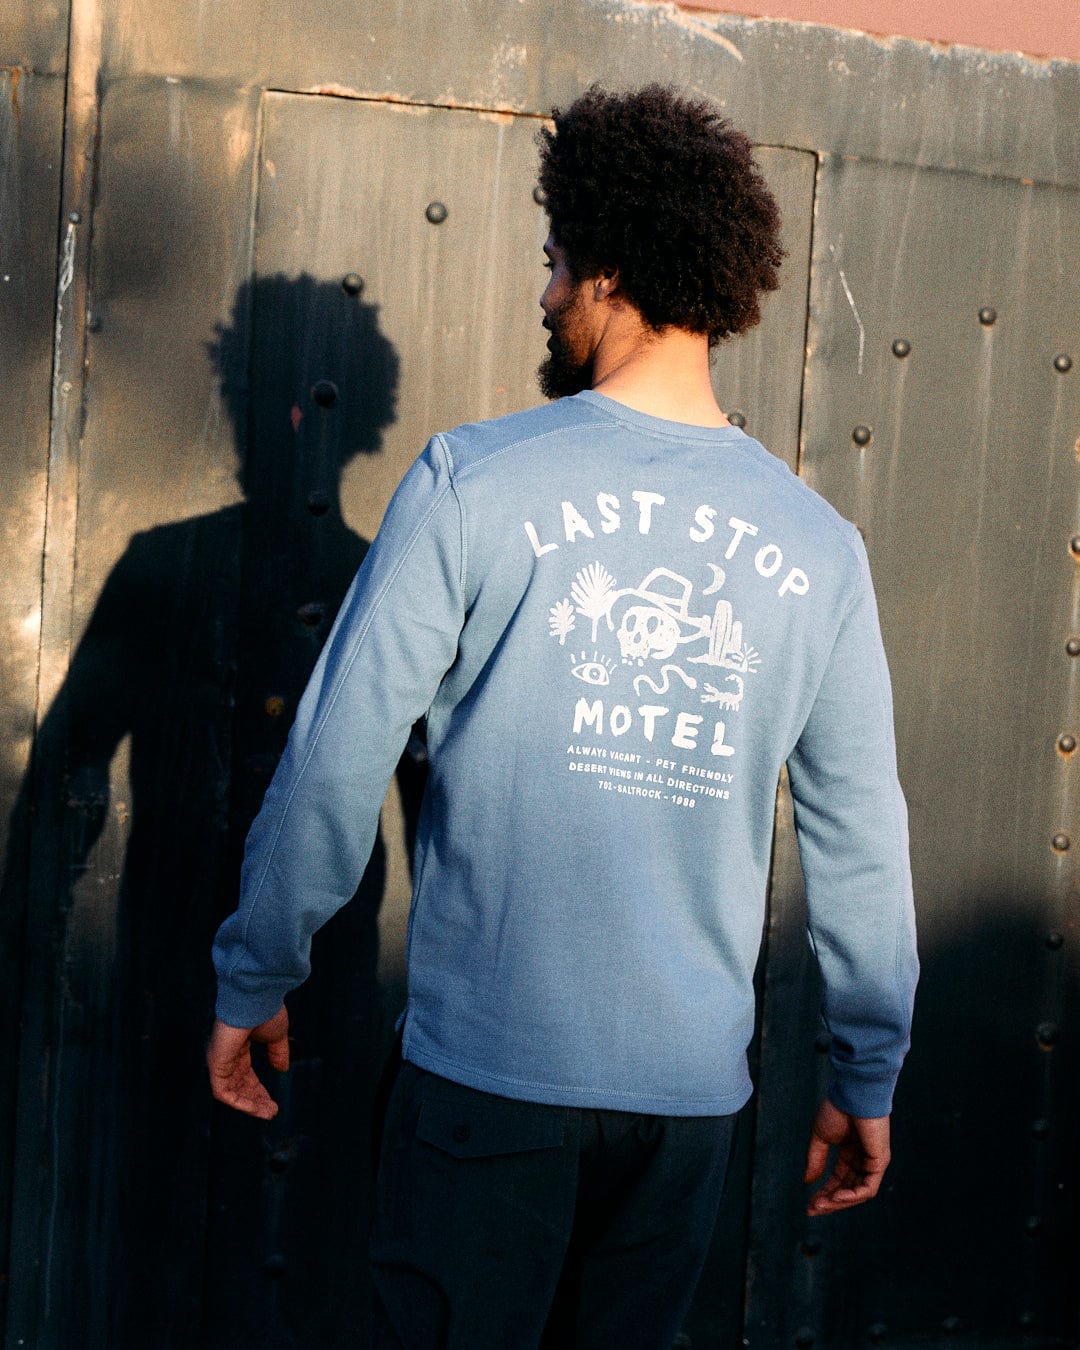 A man with an afro facing away from the camera, wearing a blue Saltrock sweatshirt made of peached soft material with "Last Stop Motel" graphic, standing by a metal wall.